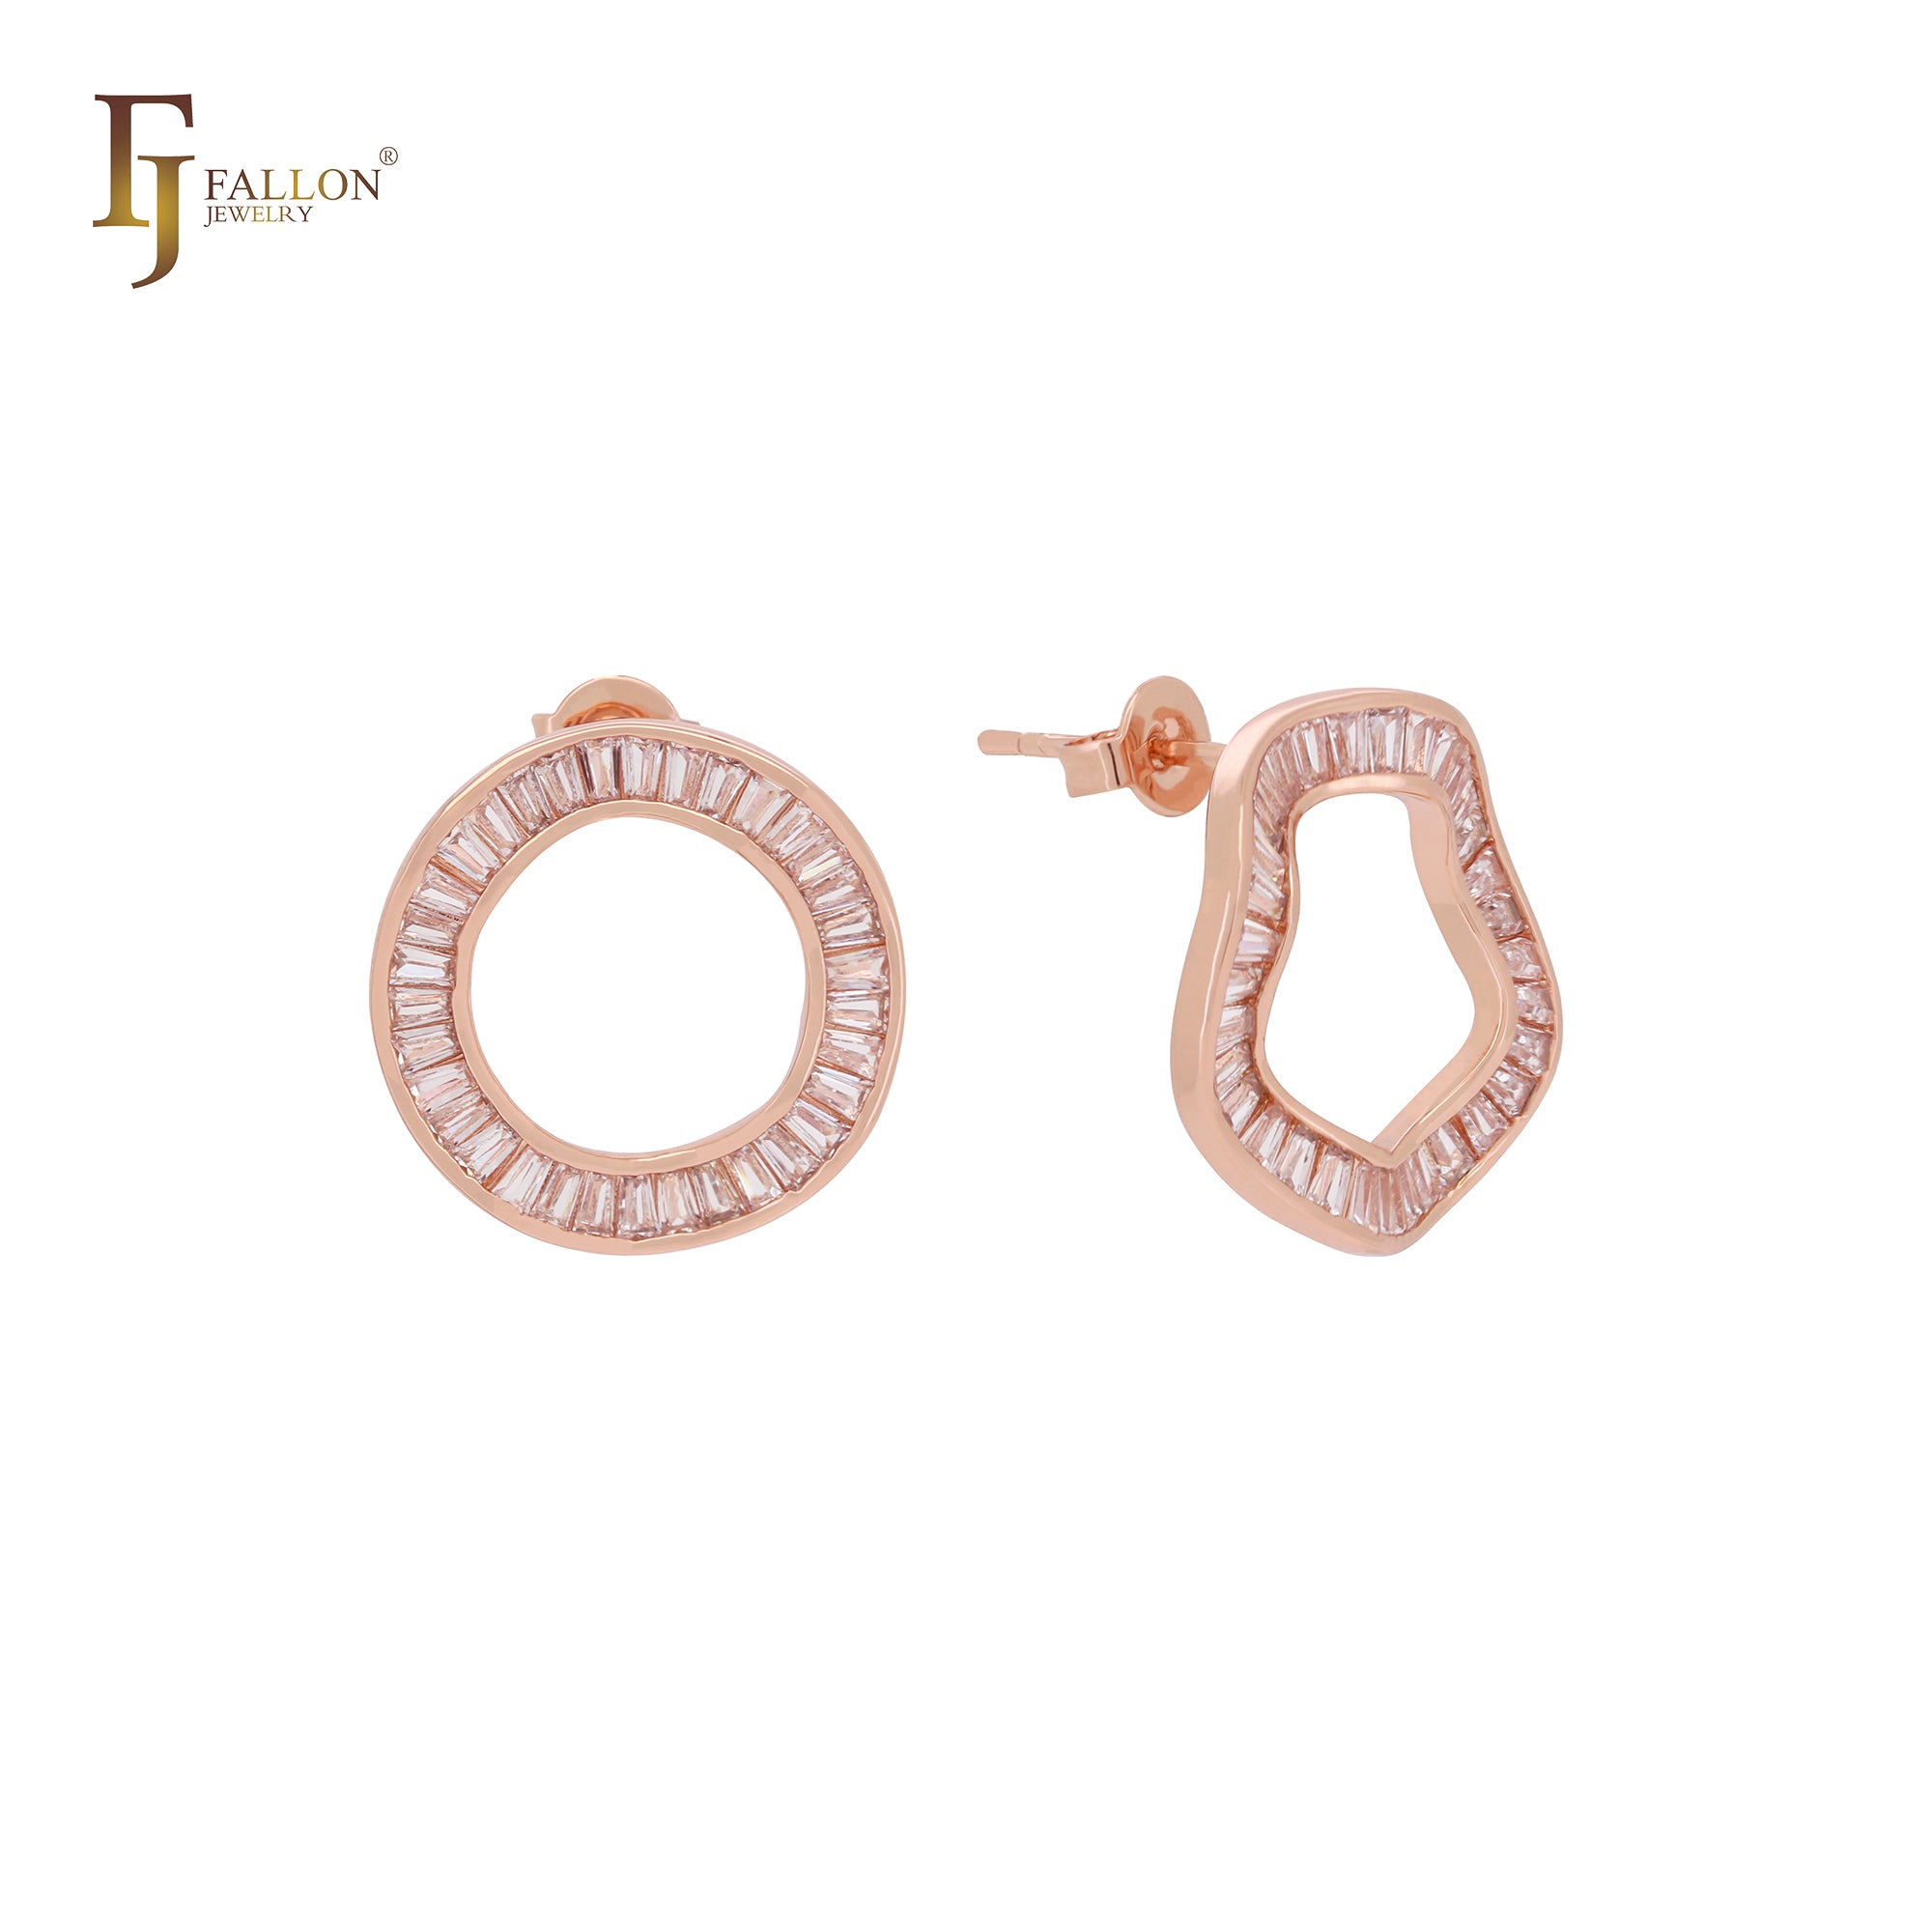 Circular baguette white CZs rounded 14K Gold, Rose Gold Stud Earrings